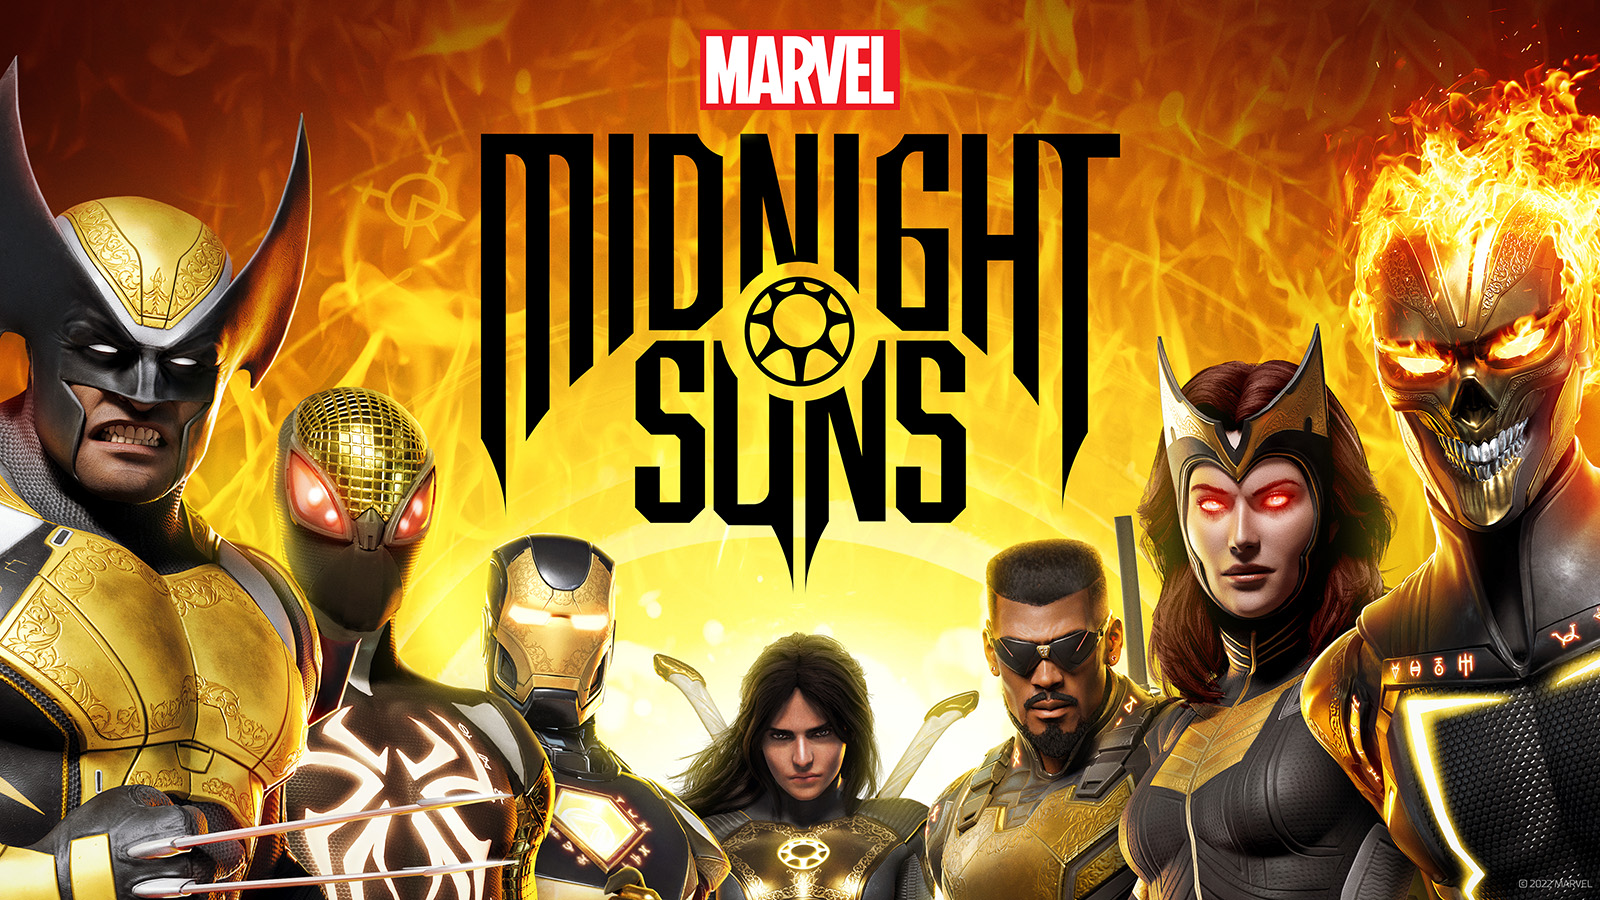 Marvel’s Midnight Suns Launches This December For PC, New-Gen Consoles